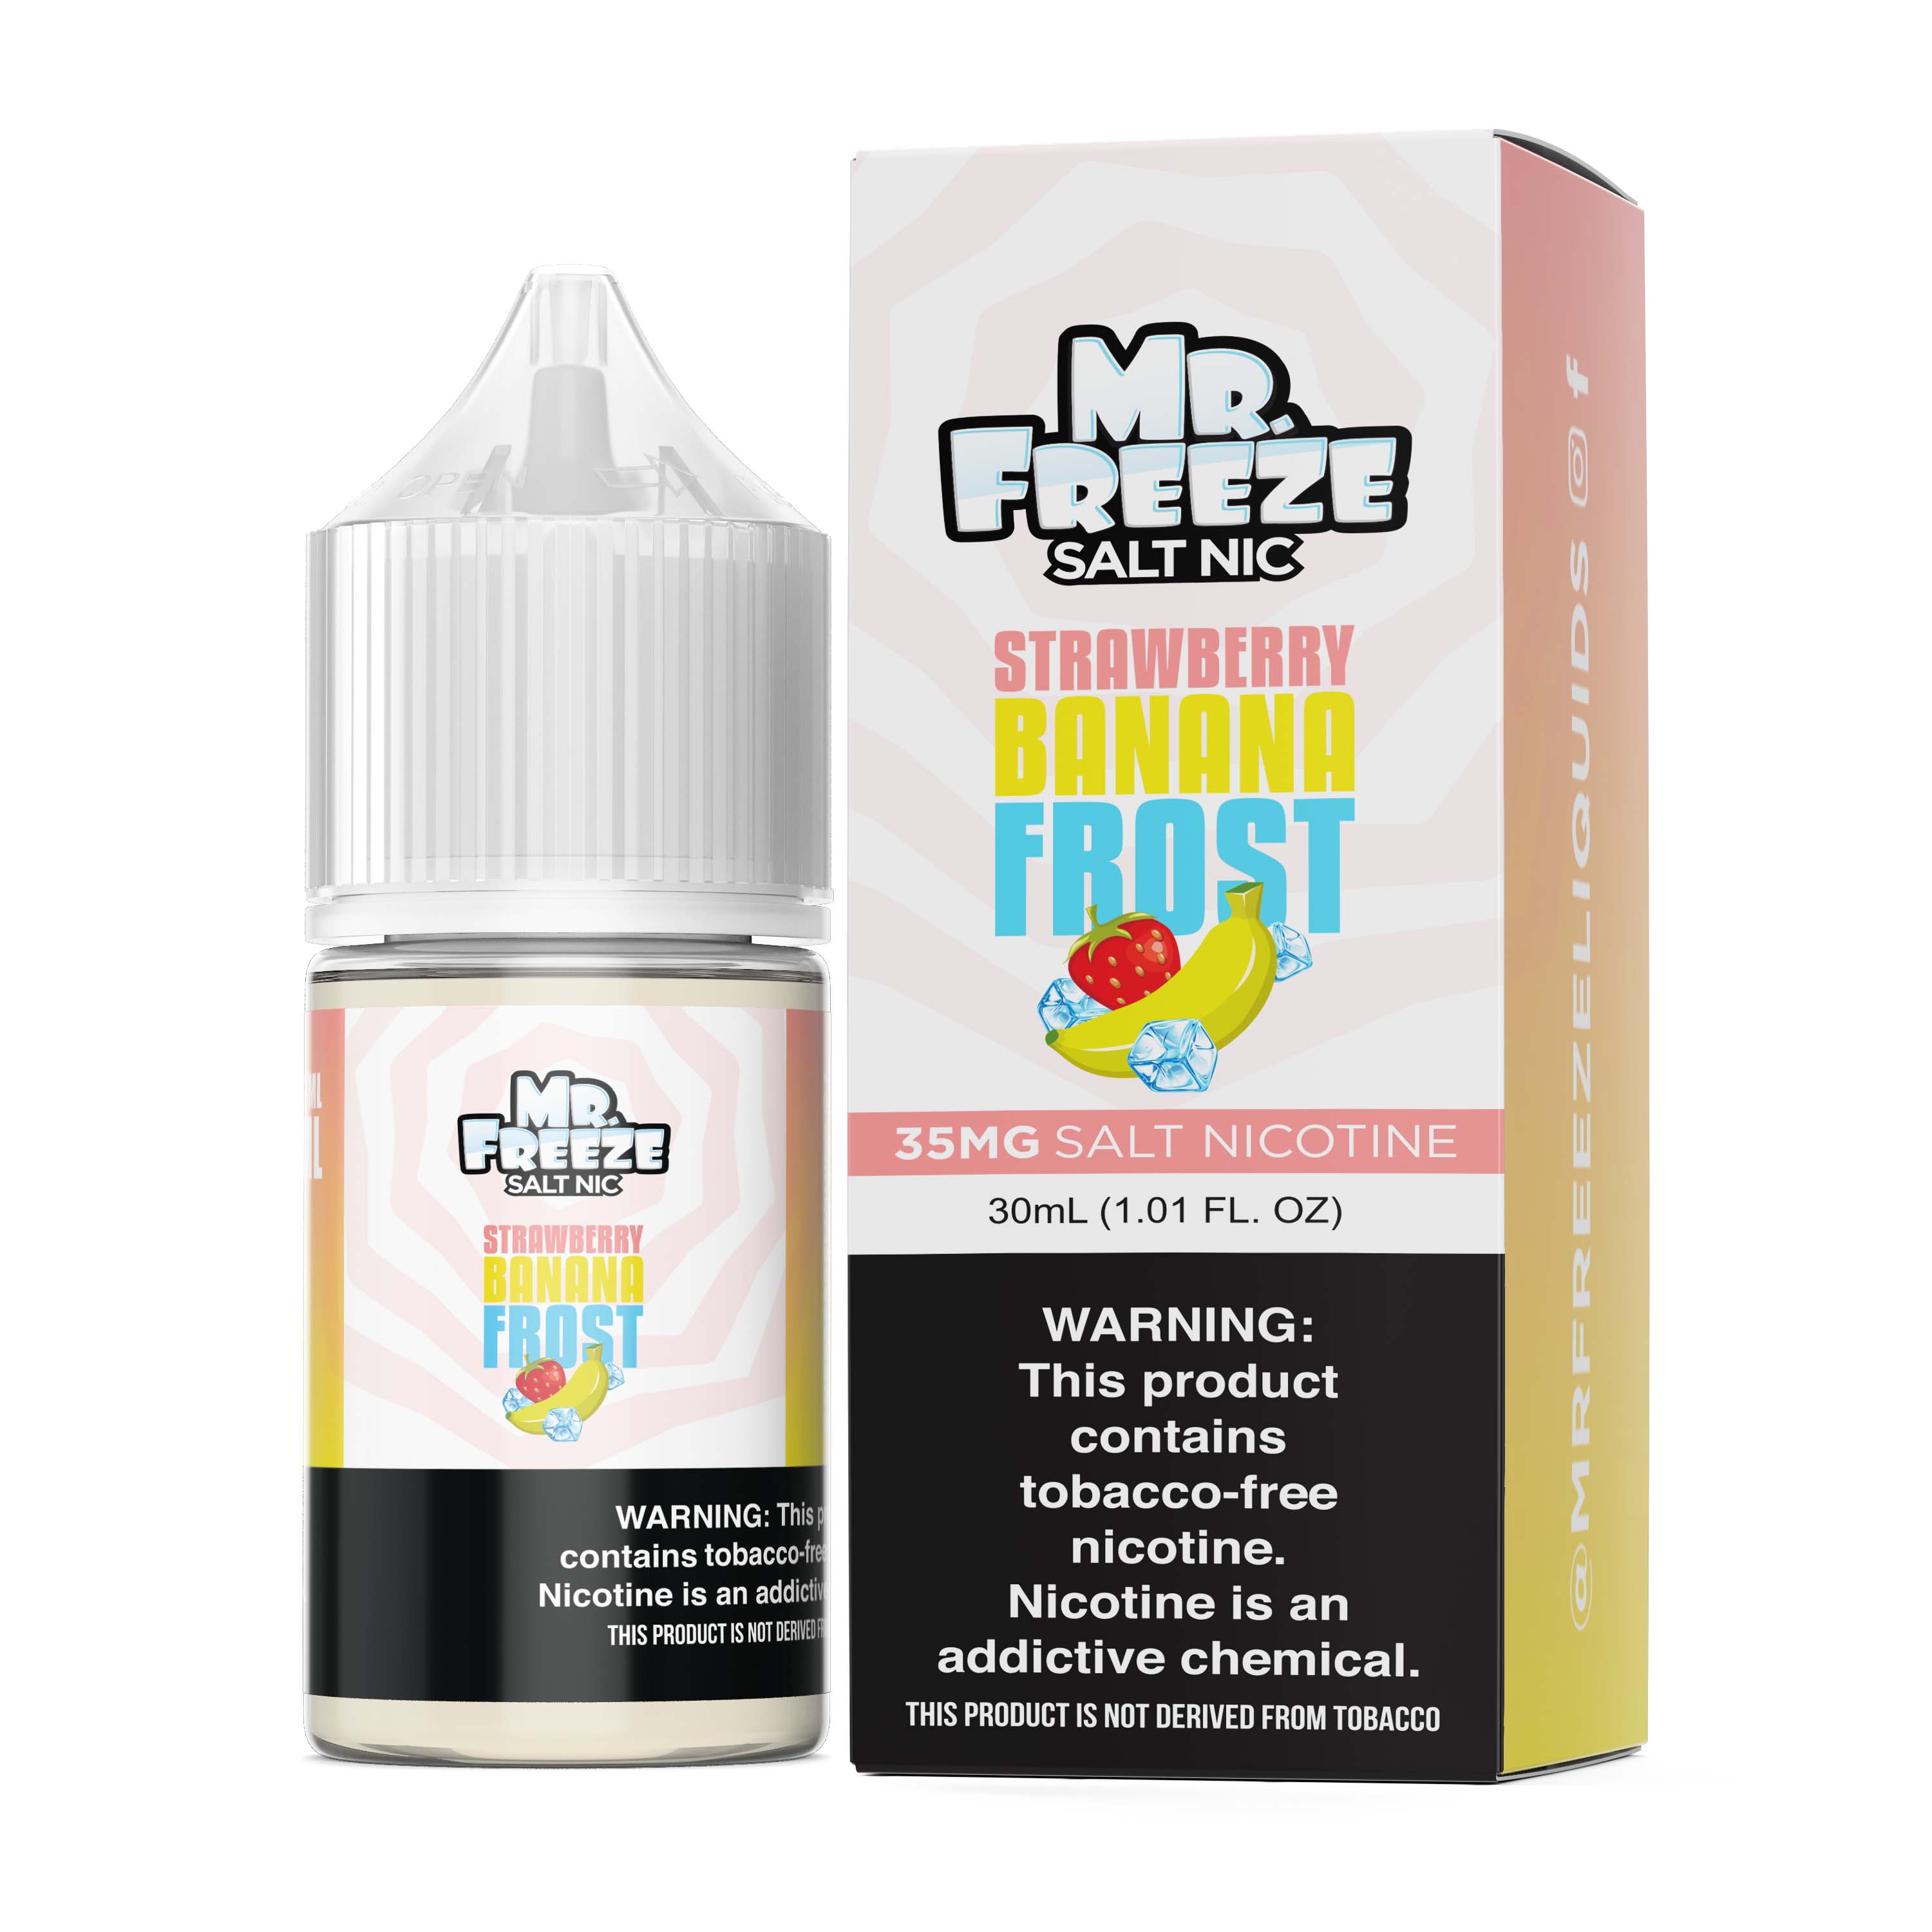 Strawberry Banana Frost by Mr. Freeze Tobacco-Free Nicotine Salt Series 30mL with Packaging